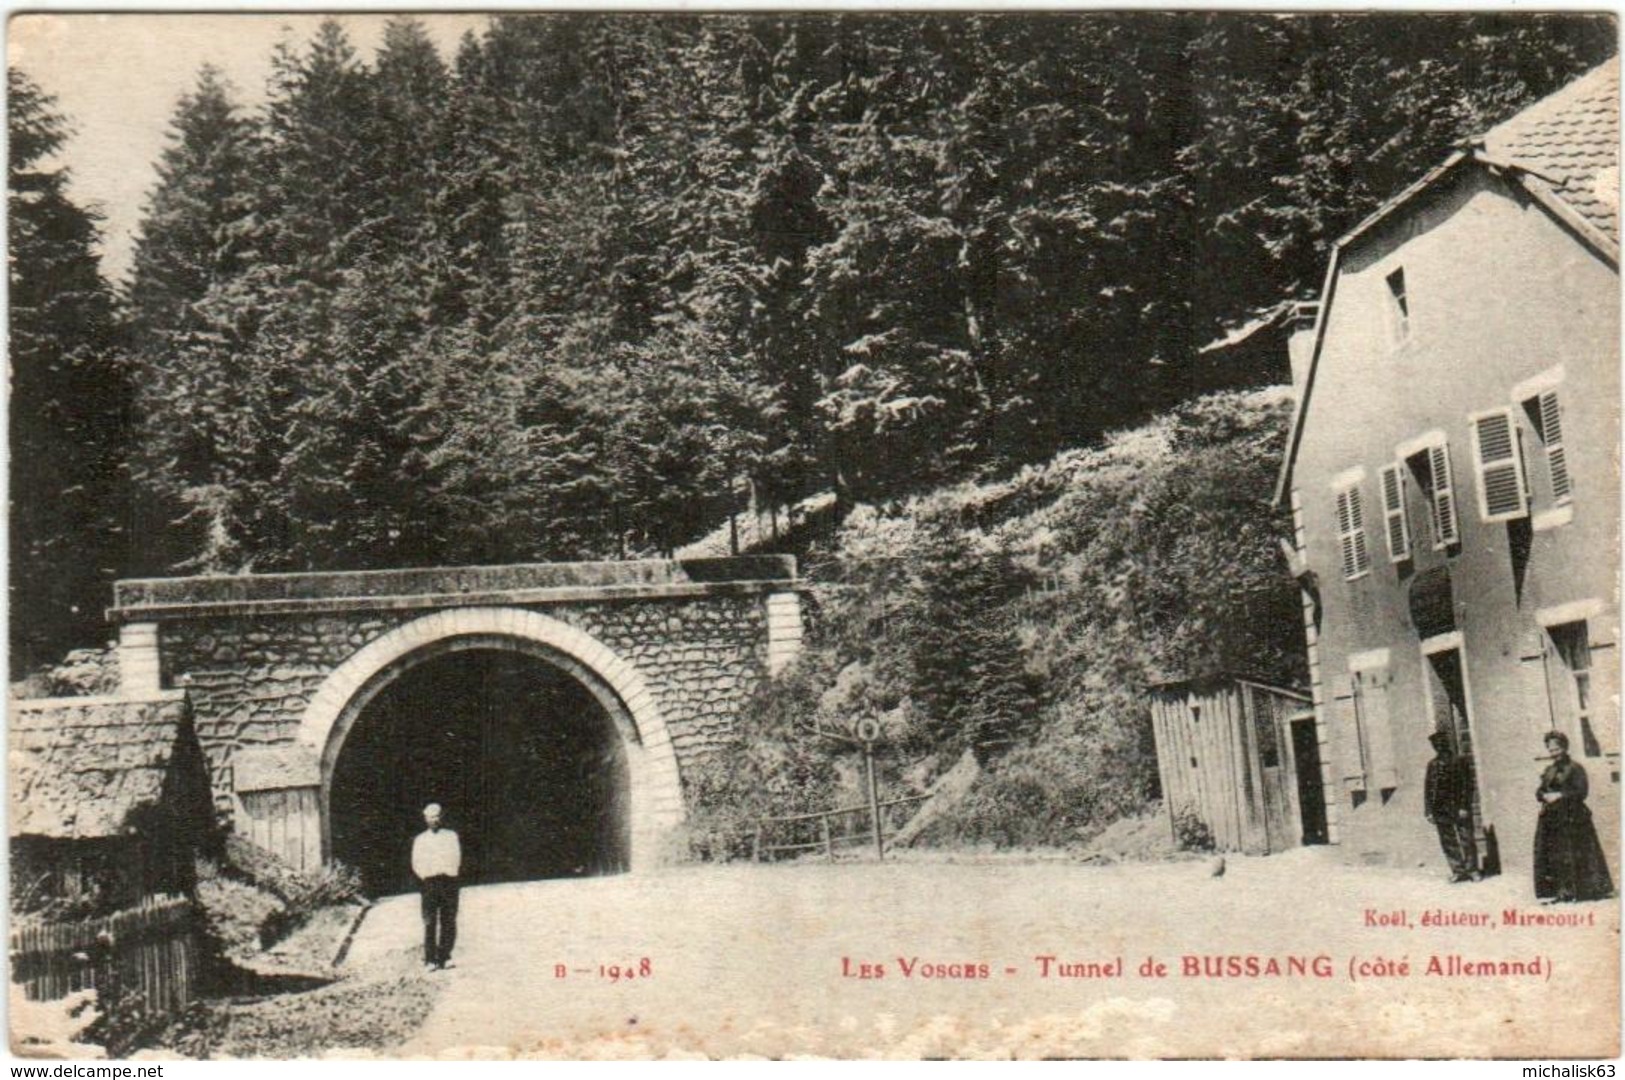 61lx 127 CPA - TUNNEL DE BUSSANG - Bussang